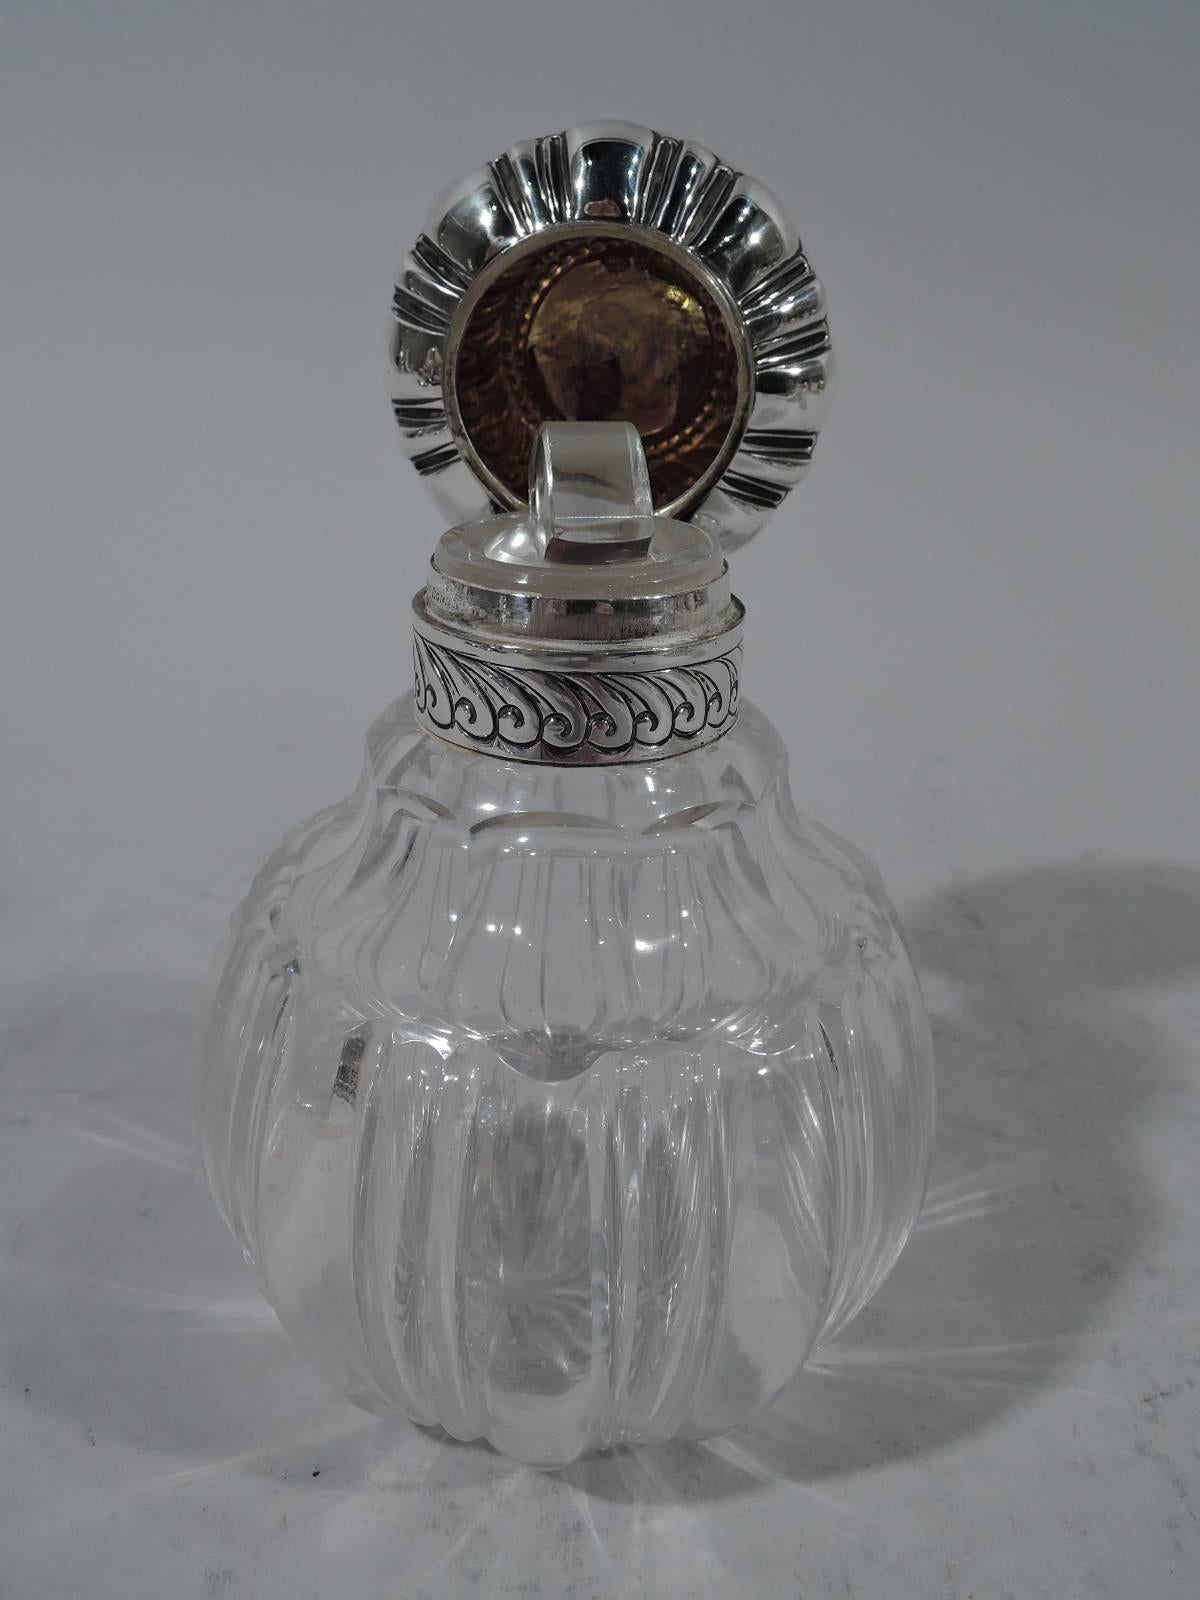 Pair of Victorian perfumes. Made by Grinsell & Sons in London in 1892. Each clear glass globular bottle with alternating flutes and lobes and faceted shoulders. Sterling silver collar and hinged bun cover. Cover has central frame with interlaced